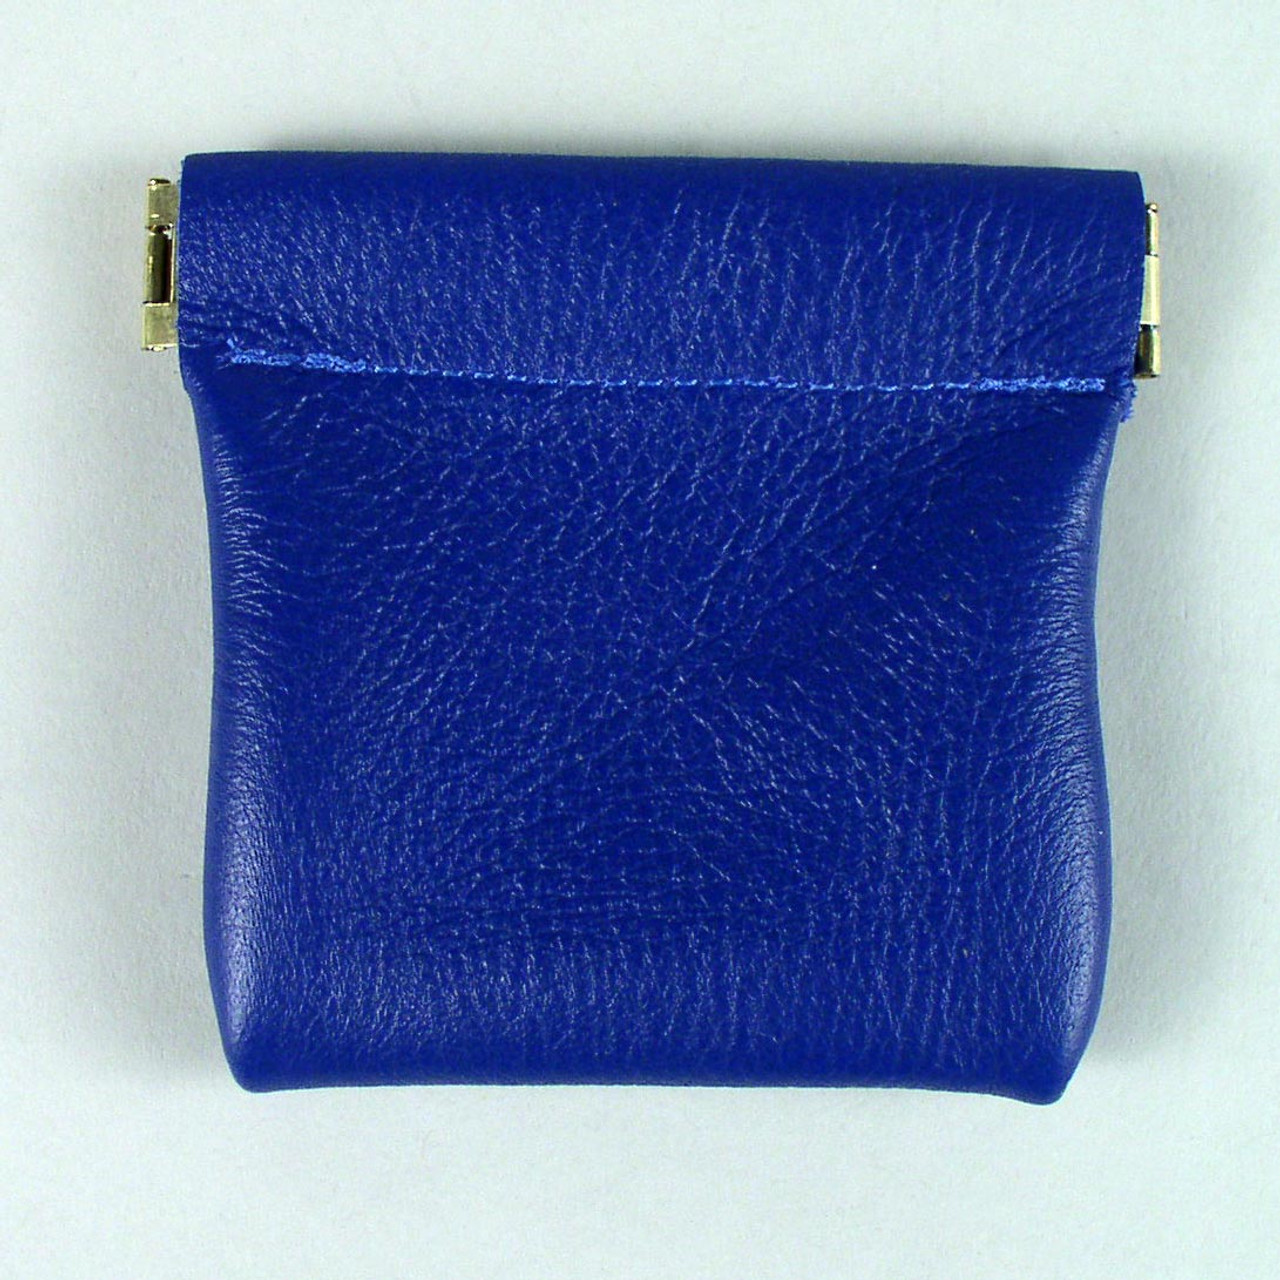 Leather Spring Frame Coin Purse - Leathersmith Designs Inc.